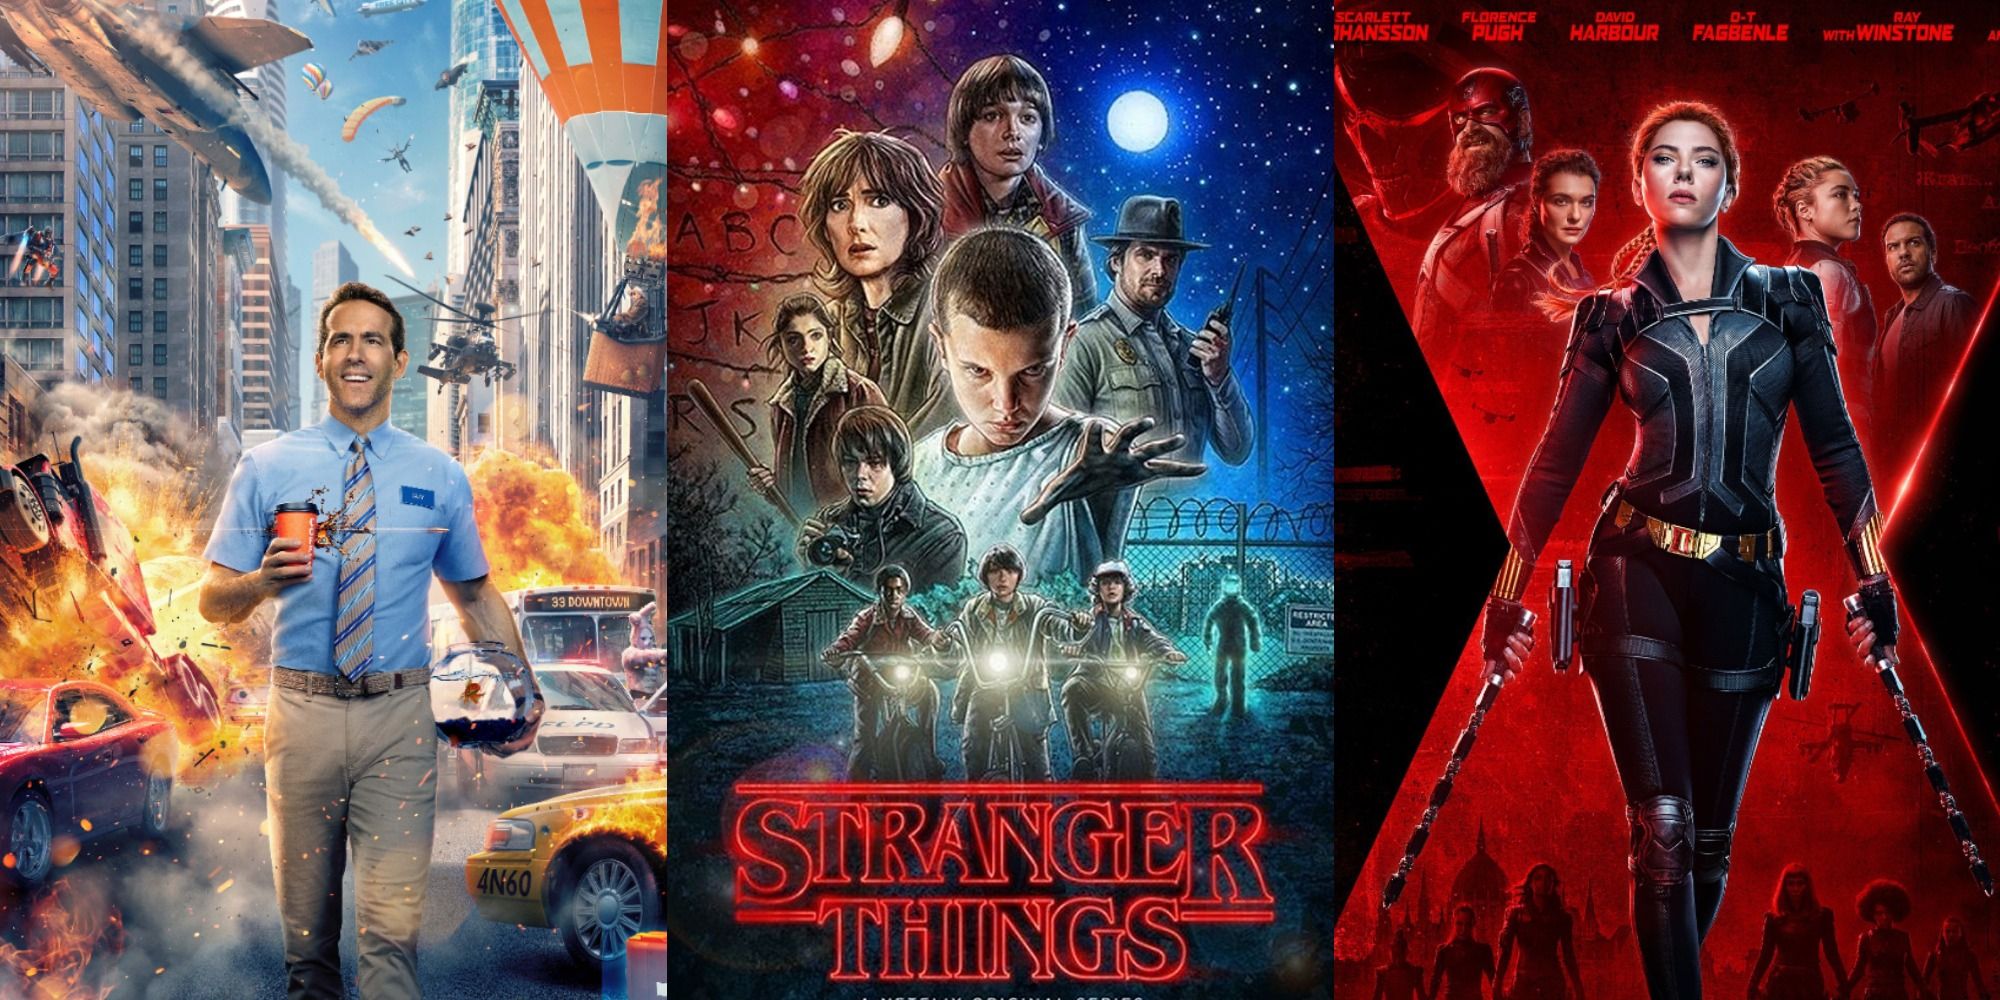 godzilla vs kong 9 other upcoming movies featuring the cast of stranger things